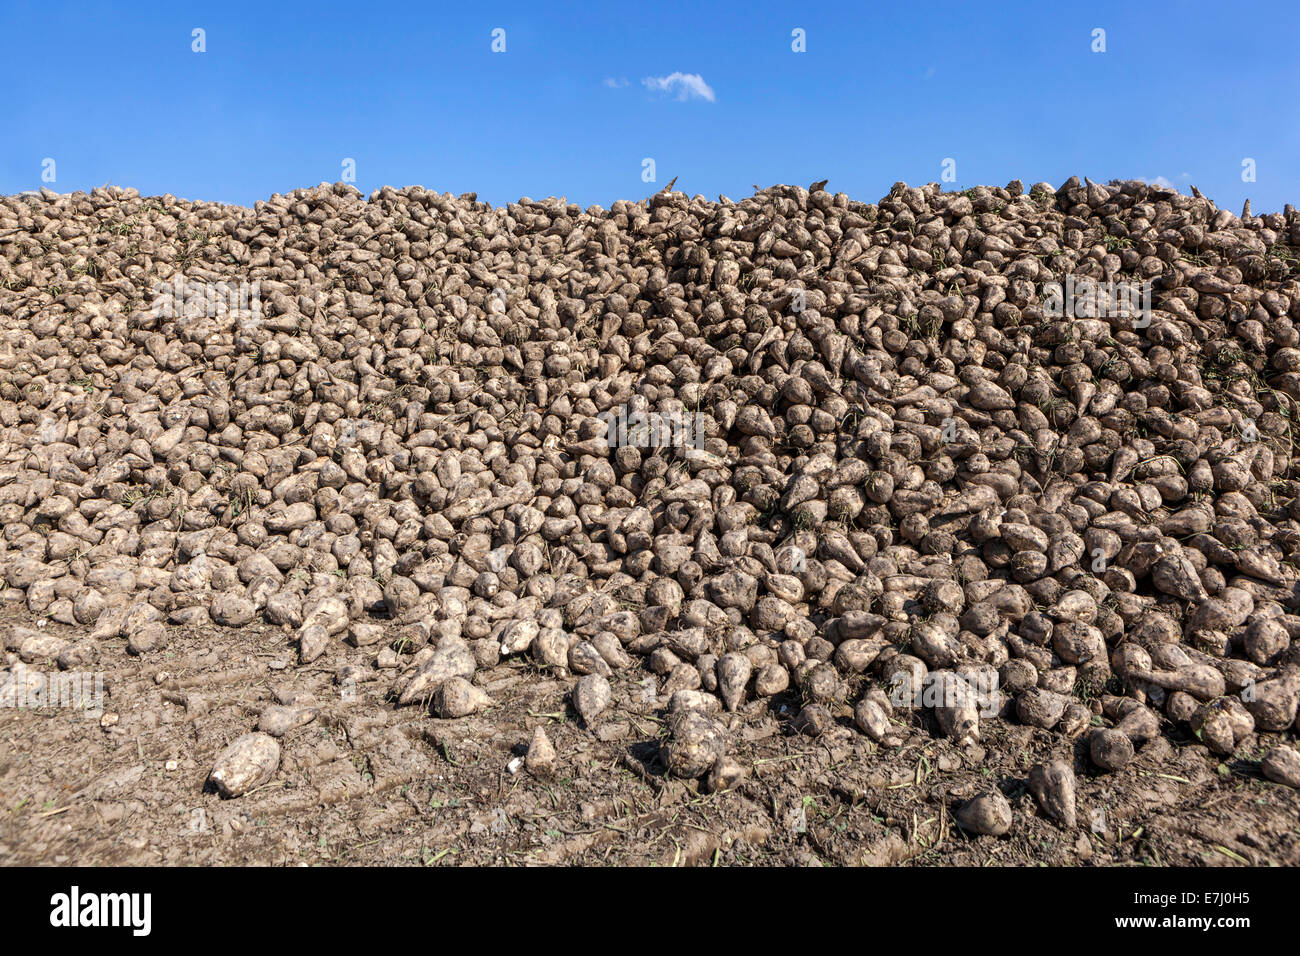 A pile of harvested Sugar Beet, Czech Republic, Europe Stock Photo